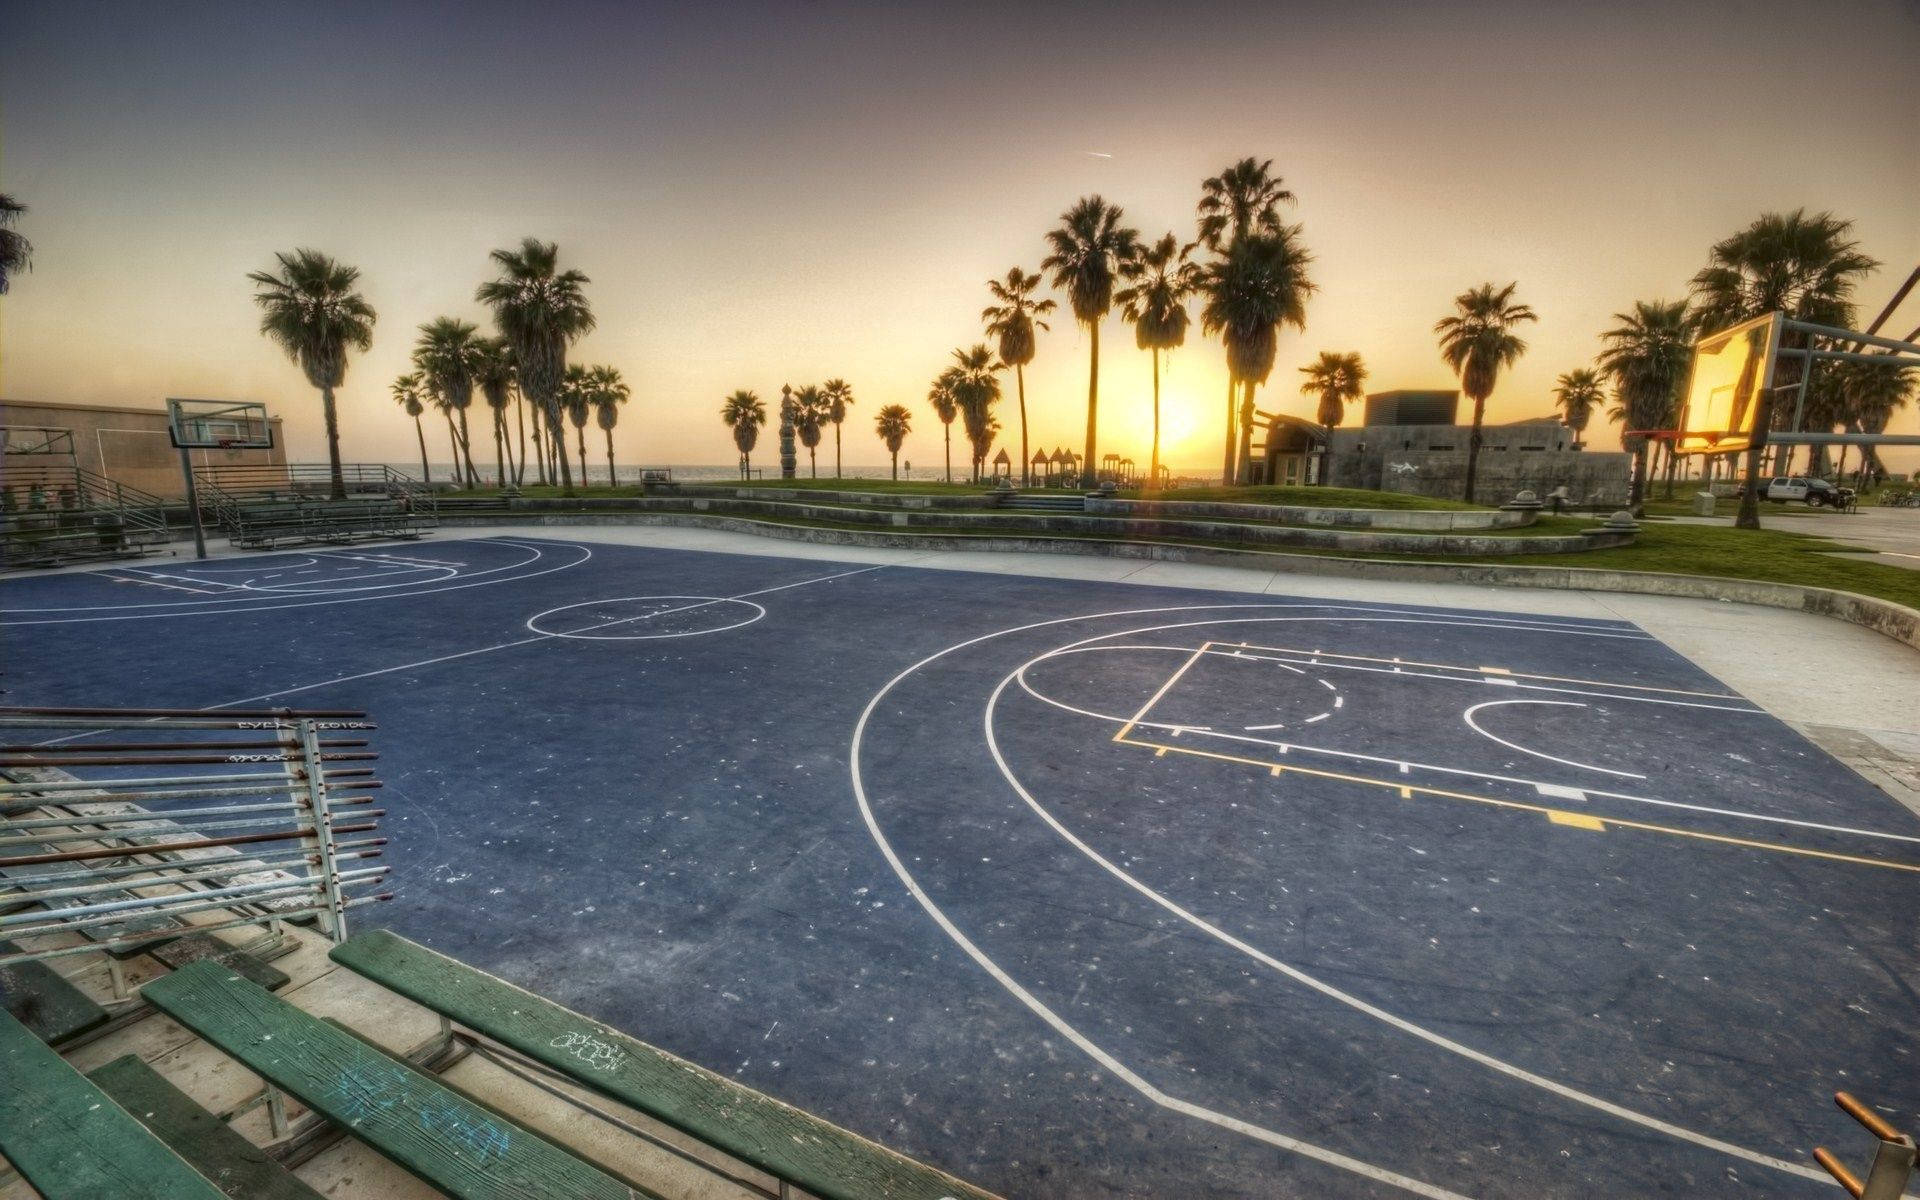 Gray Basketball Court In Los Angeles Background